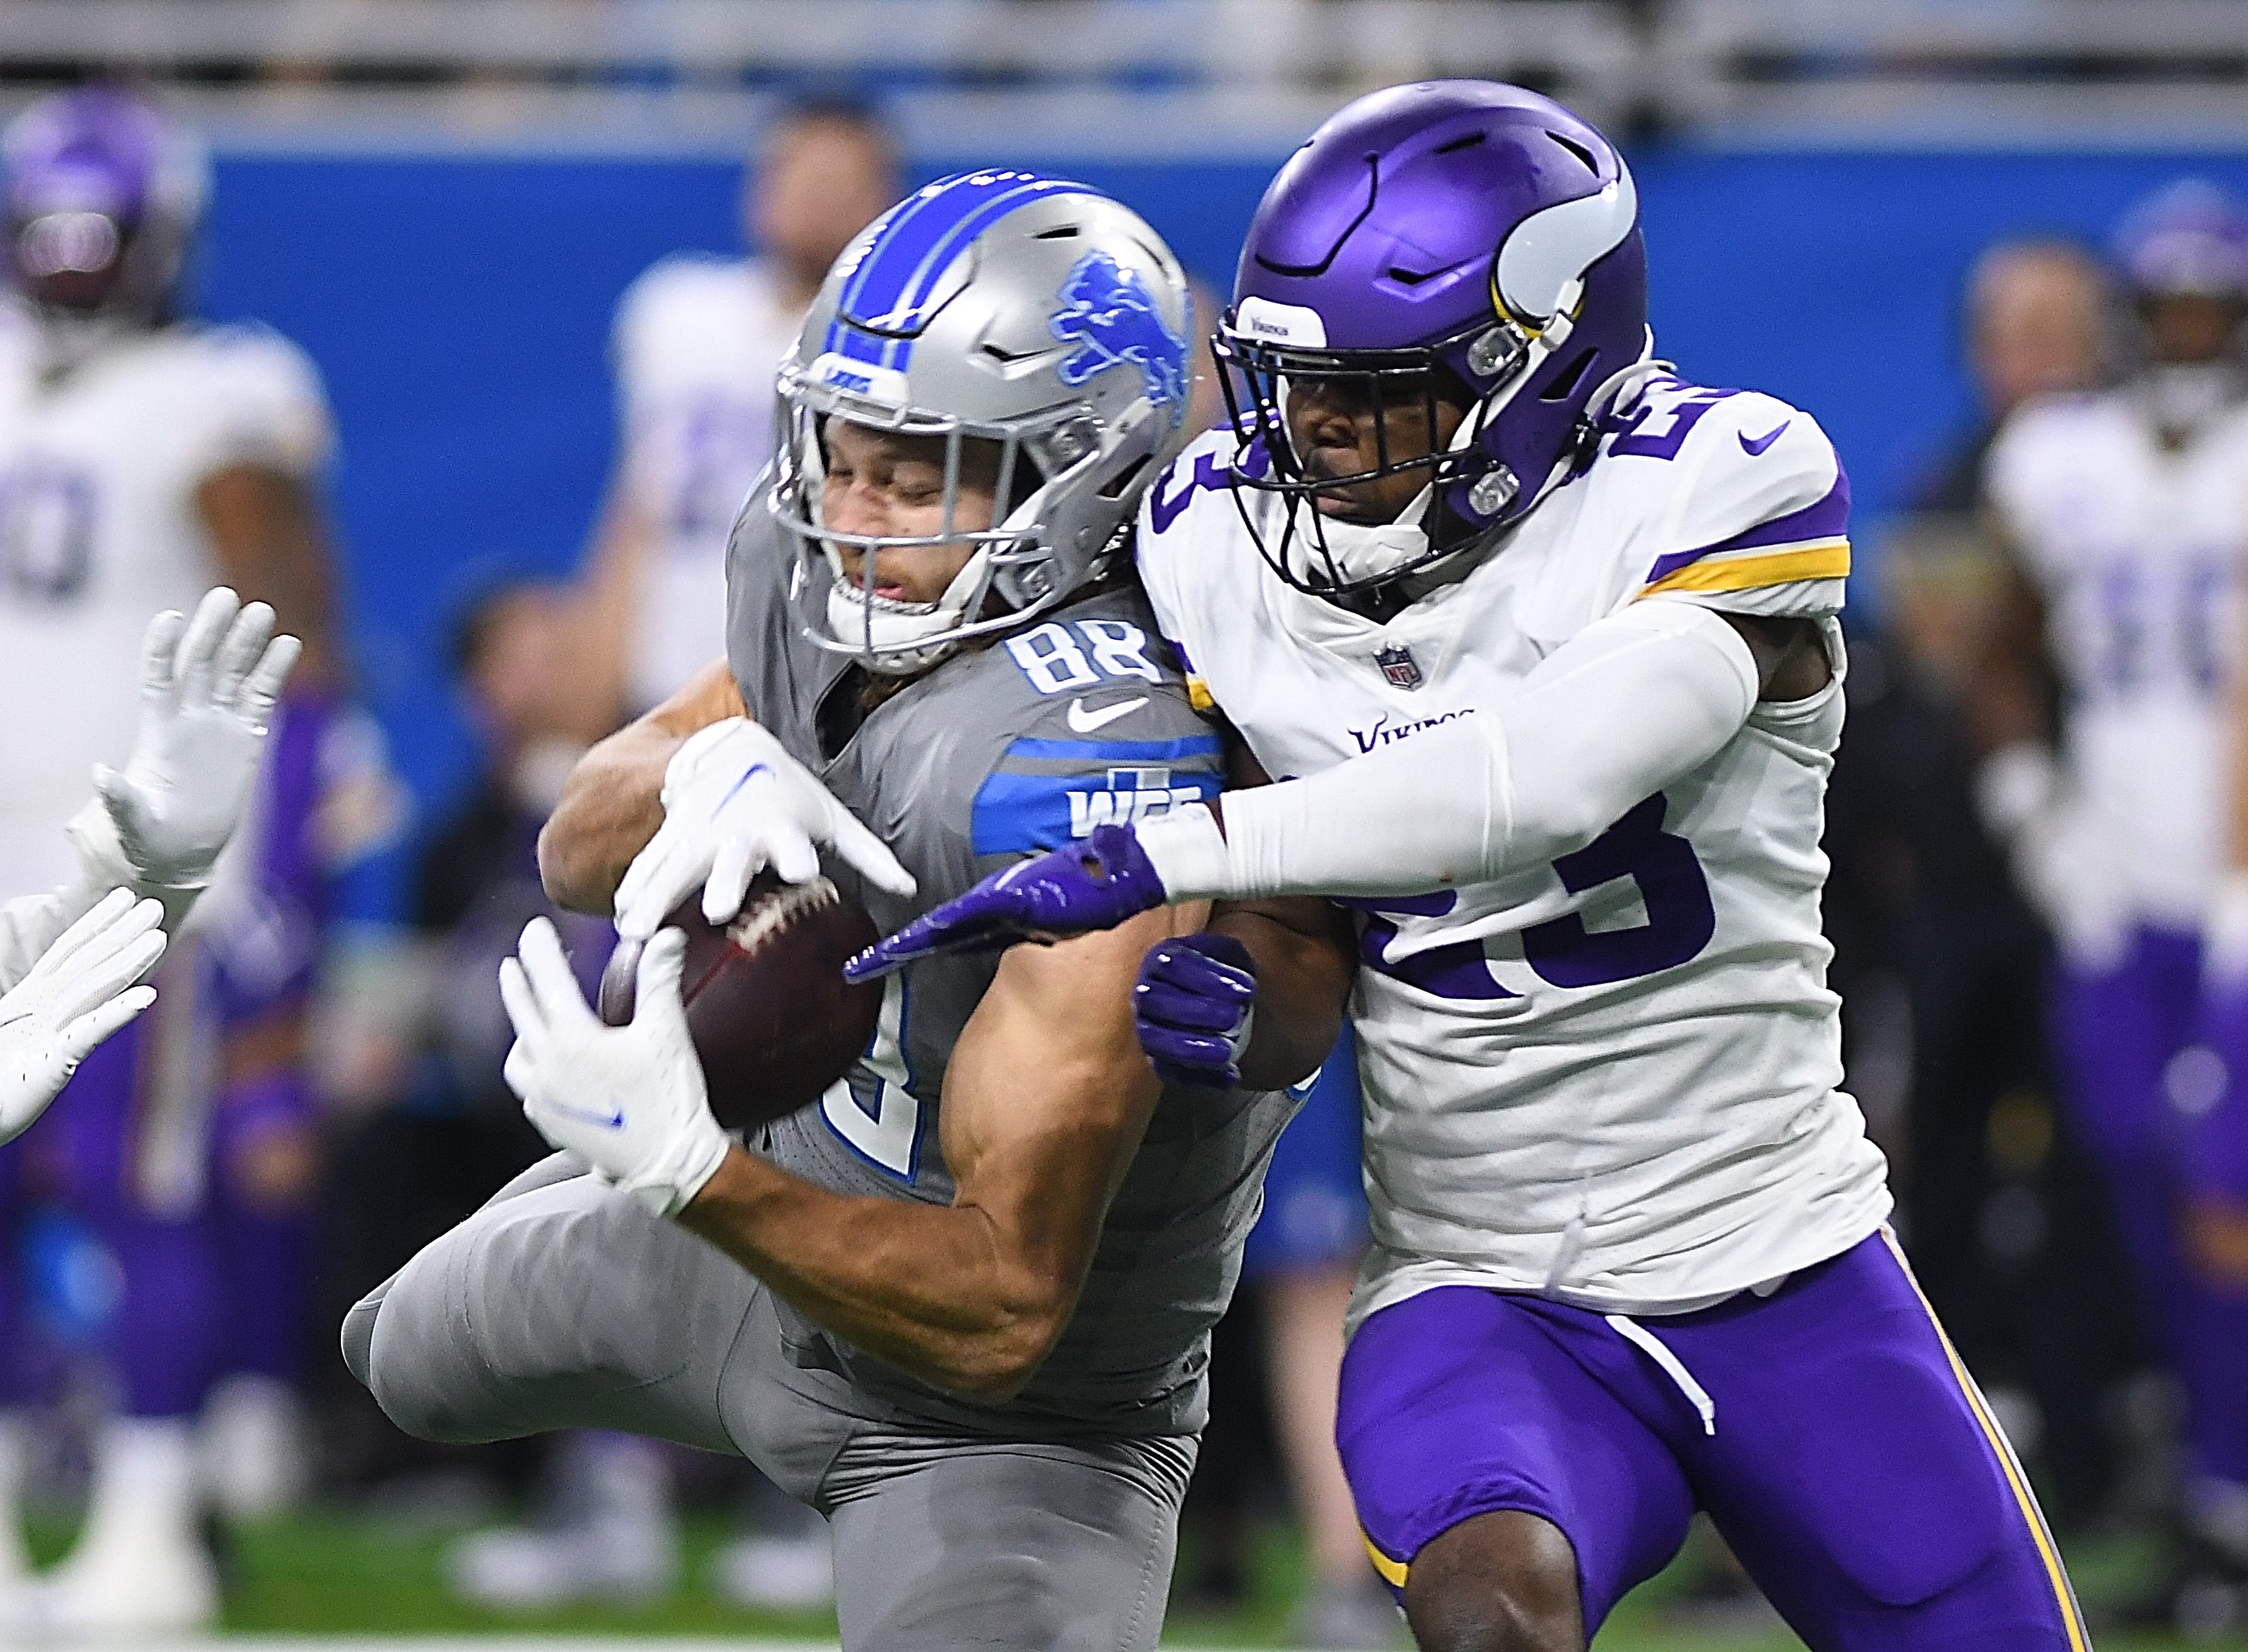 Lions’ T.J. Hockenson pulls in a first down reception in front of Vikings’ Xavier Woods in the second quarter.